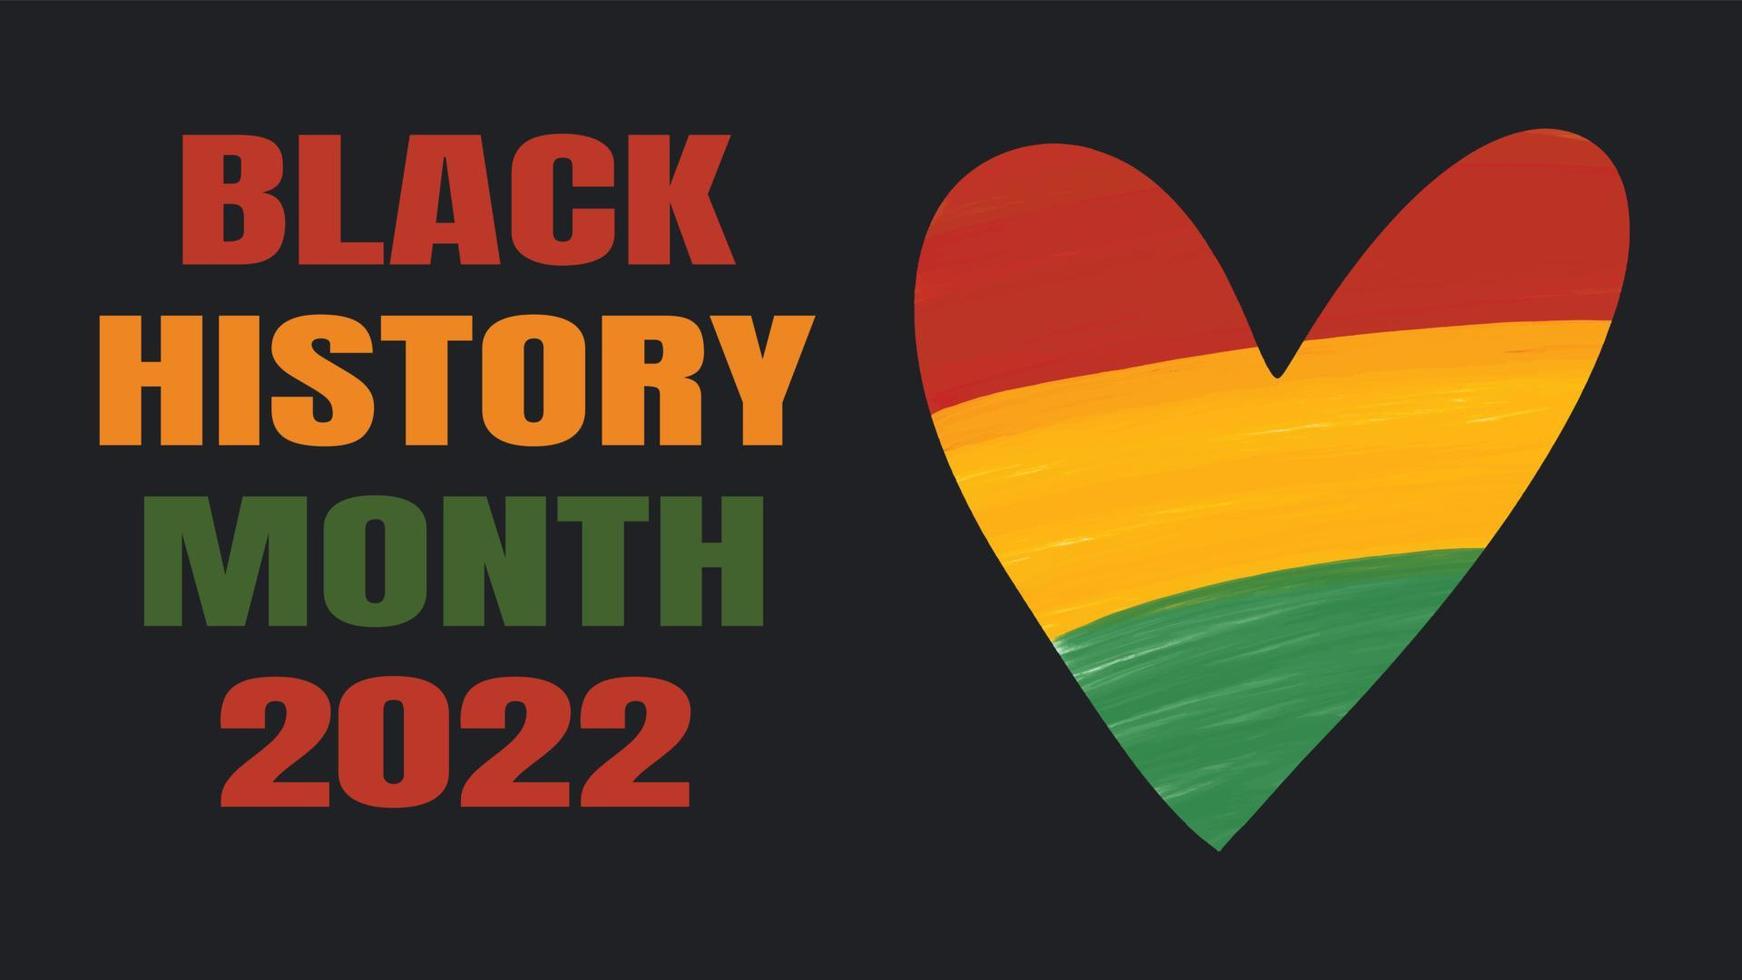 Black History Month 2022 - African American heritage celebration in USA. Vector illustration with text, hand drawn artistic grunge textured heart on black background. Greeting card, banner